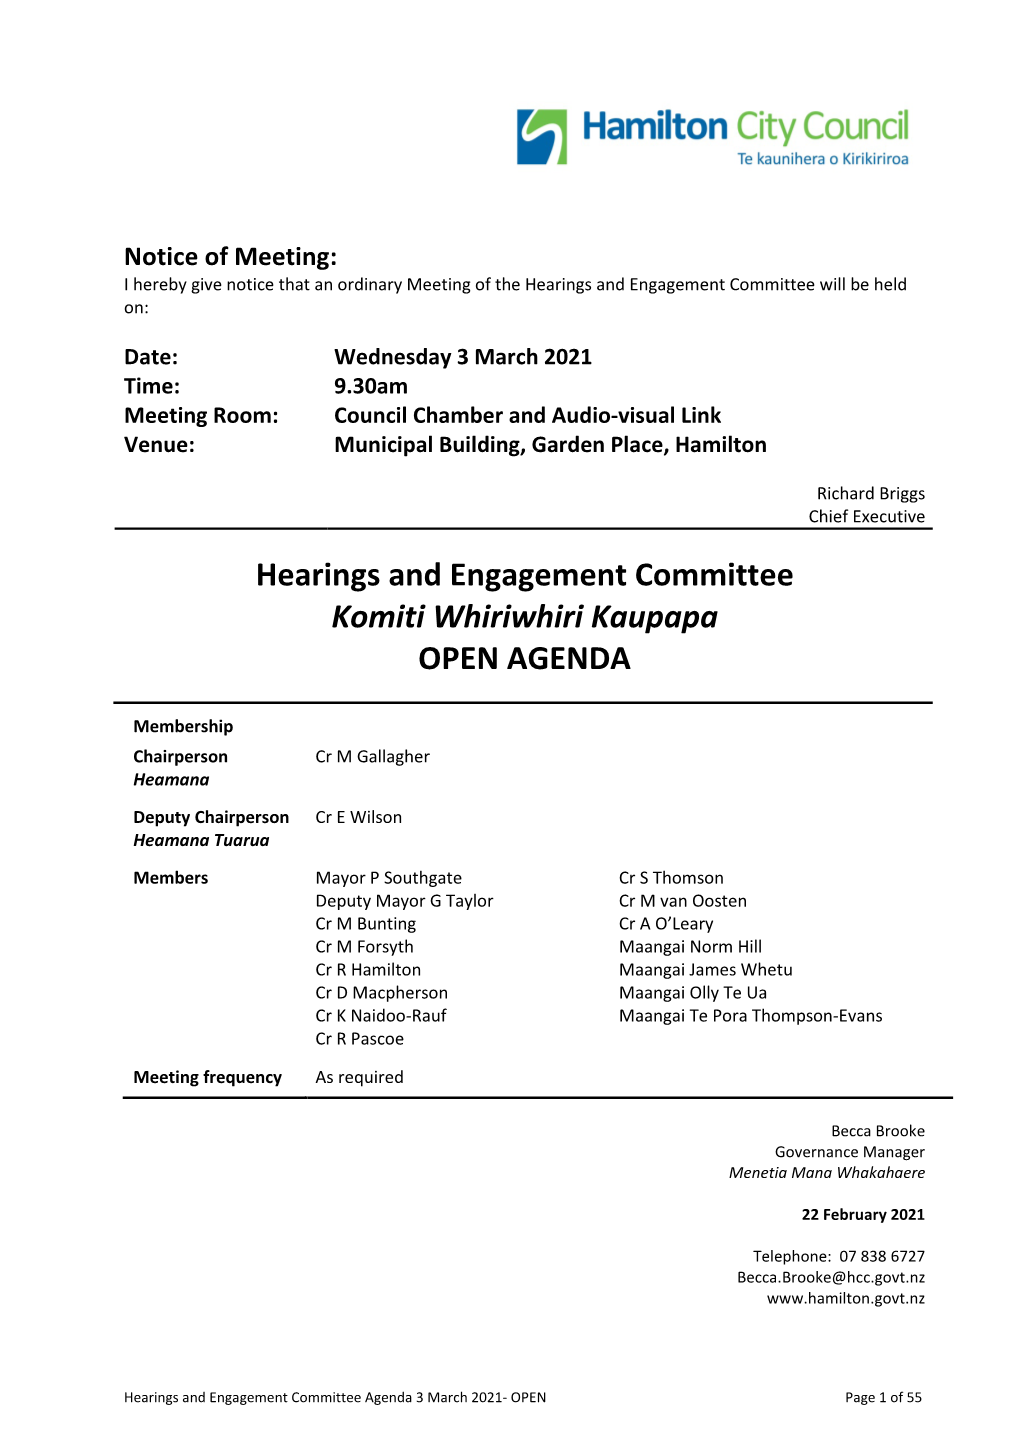 Hearings and Engagement Committee Open Agenda